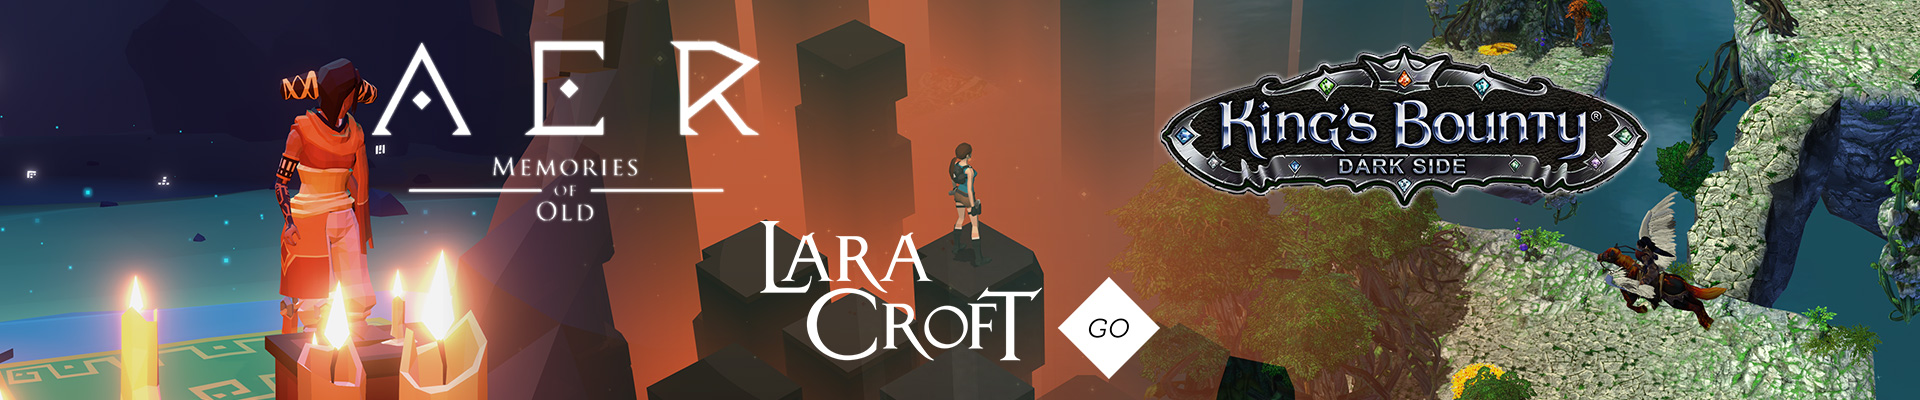 Thoughts on: AER, Lara Croft GO and King’s Bounty: Dark Side